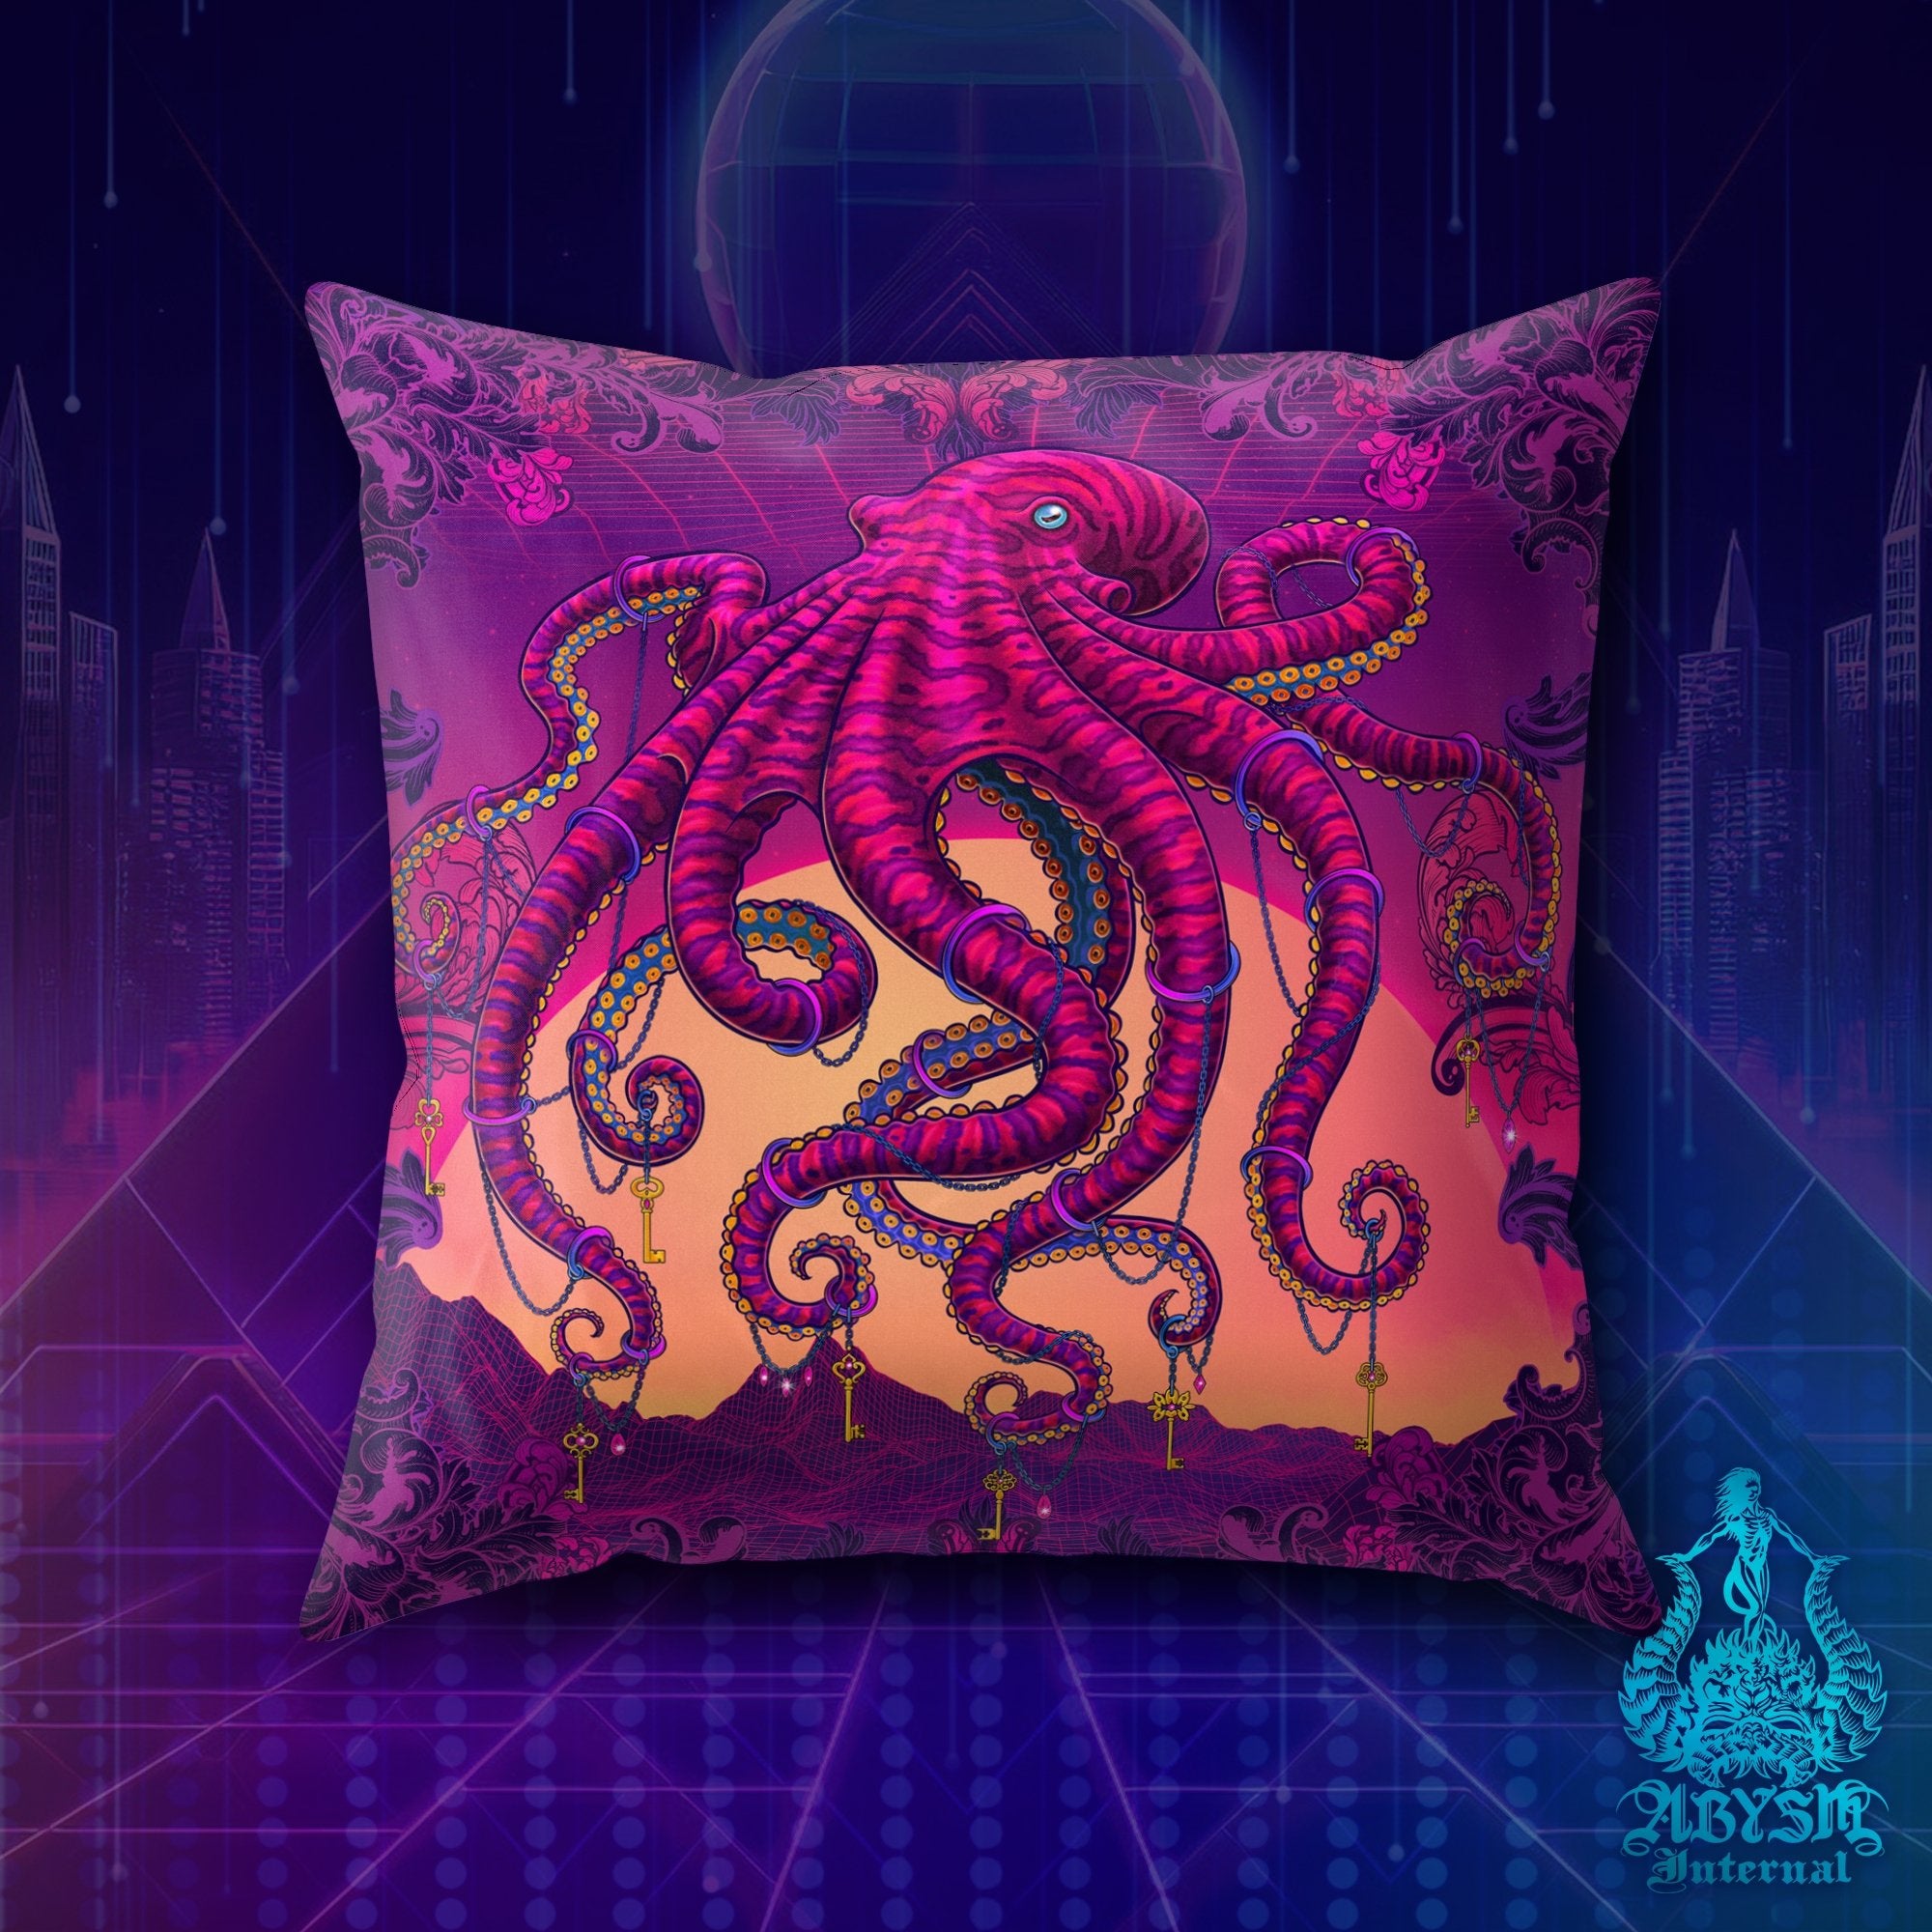 https://cdn.shopify.com/s/files/1/0584/5608/0574/products/vaporwave-throw-pillow-synthwave-decorative-accent-cushion-retrowave-80s-room-decor-psychedelic-art-print-octopus-abysm-internal-366483.jpg?v=1686711209&width=4000